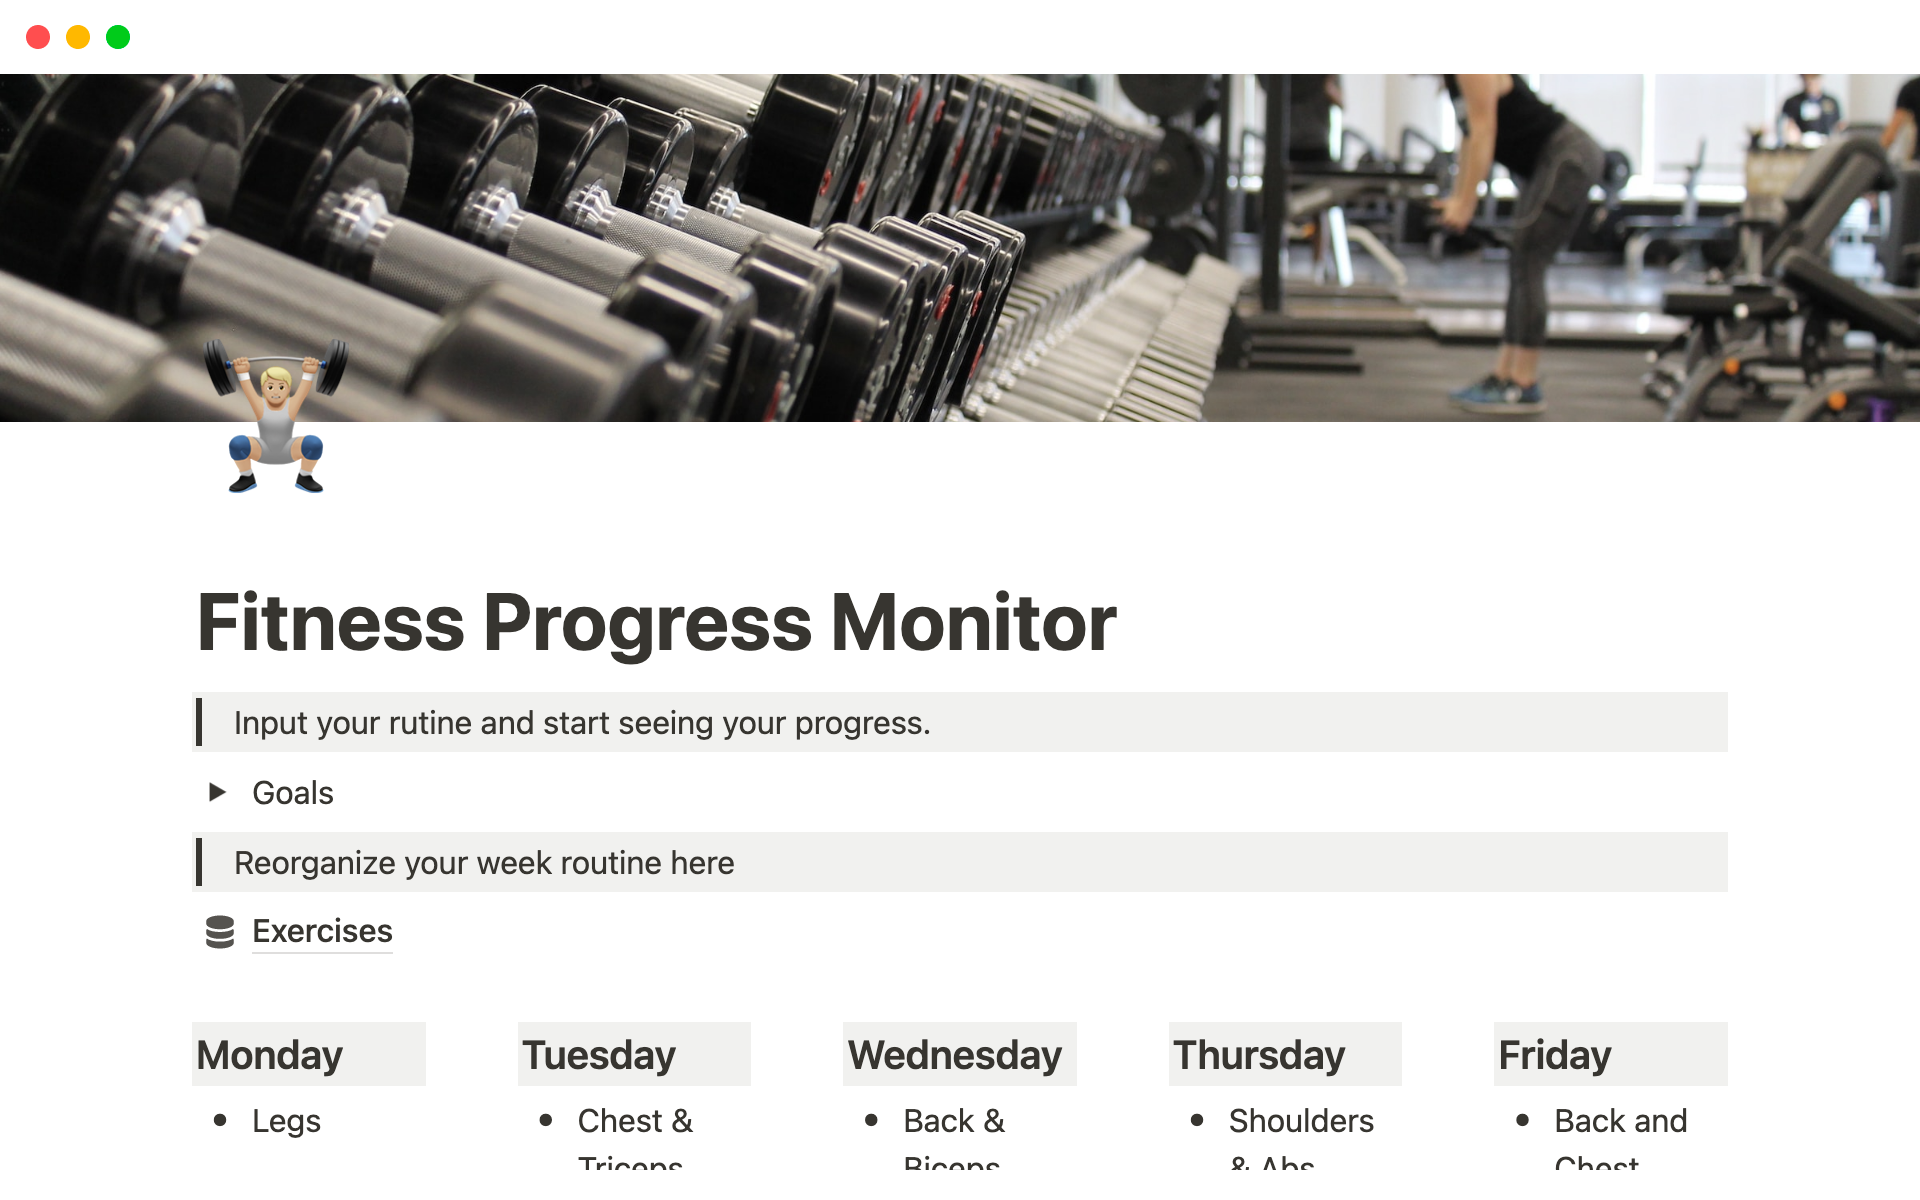 Helps you organize and witness your fitness progress